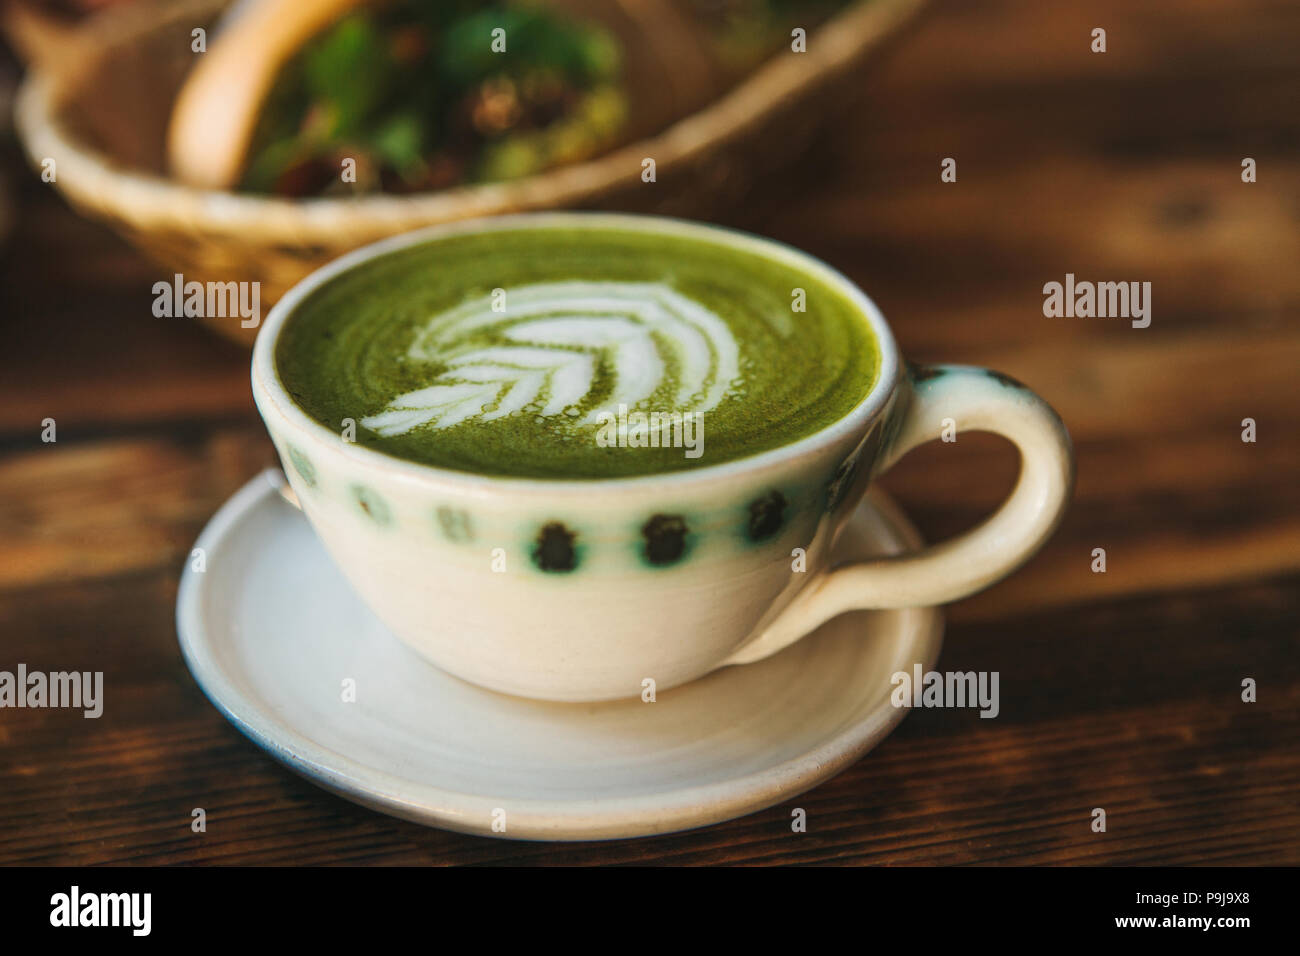 Close-up - A cup of green tea called Matcha tea or green coffee with a pattern. Stock Photo